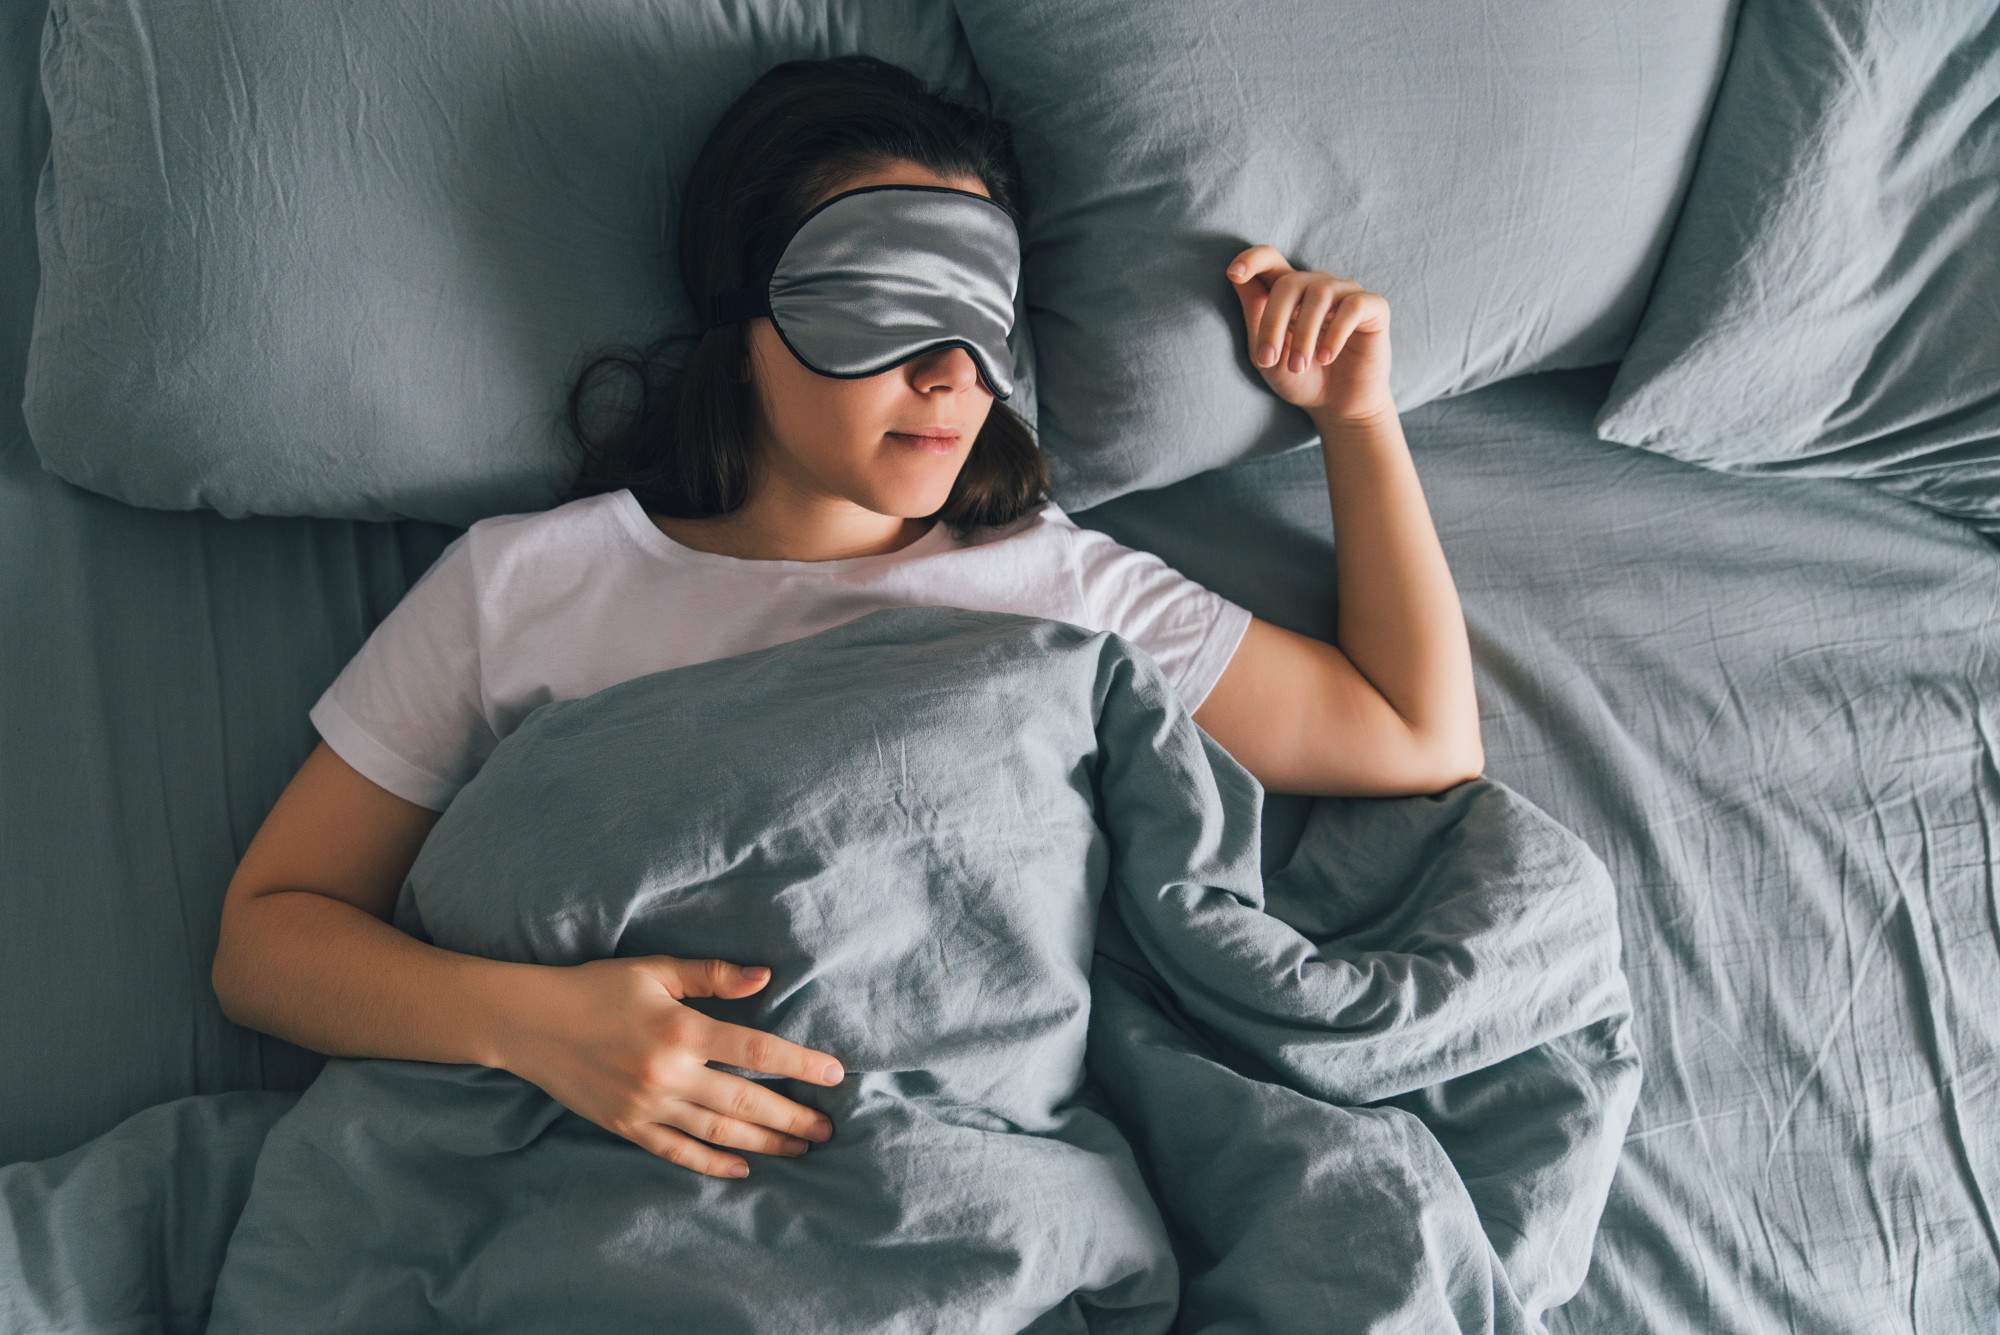 Importance of Sleep for Students: 14 Tips for Getting Better Sleep